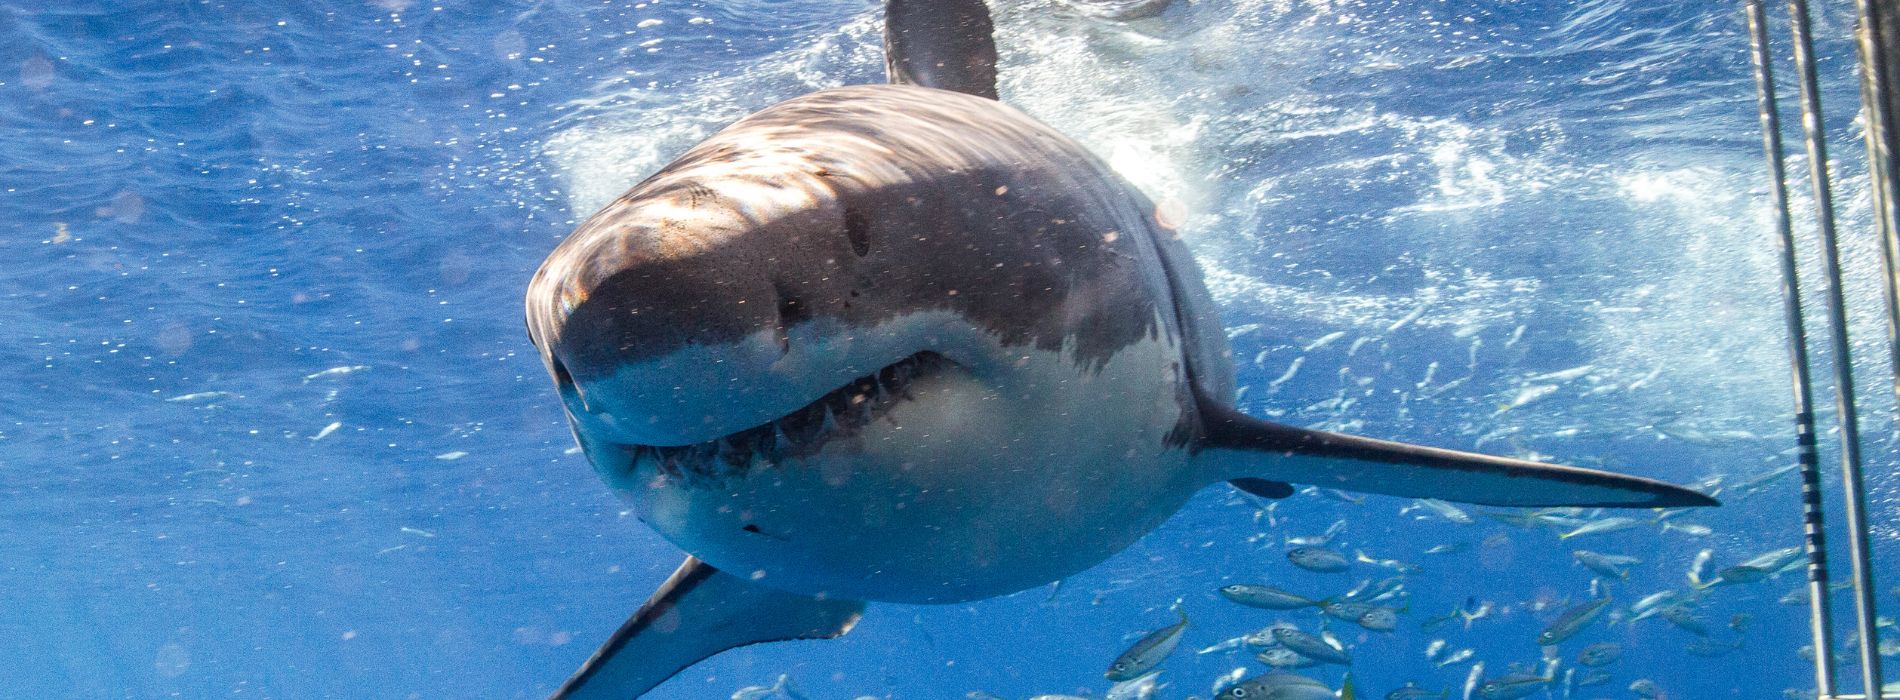 Shark Cage Diving North Carolina: A Thrilling Experience for Sea Lovers - Madeinsea©